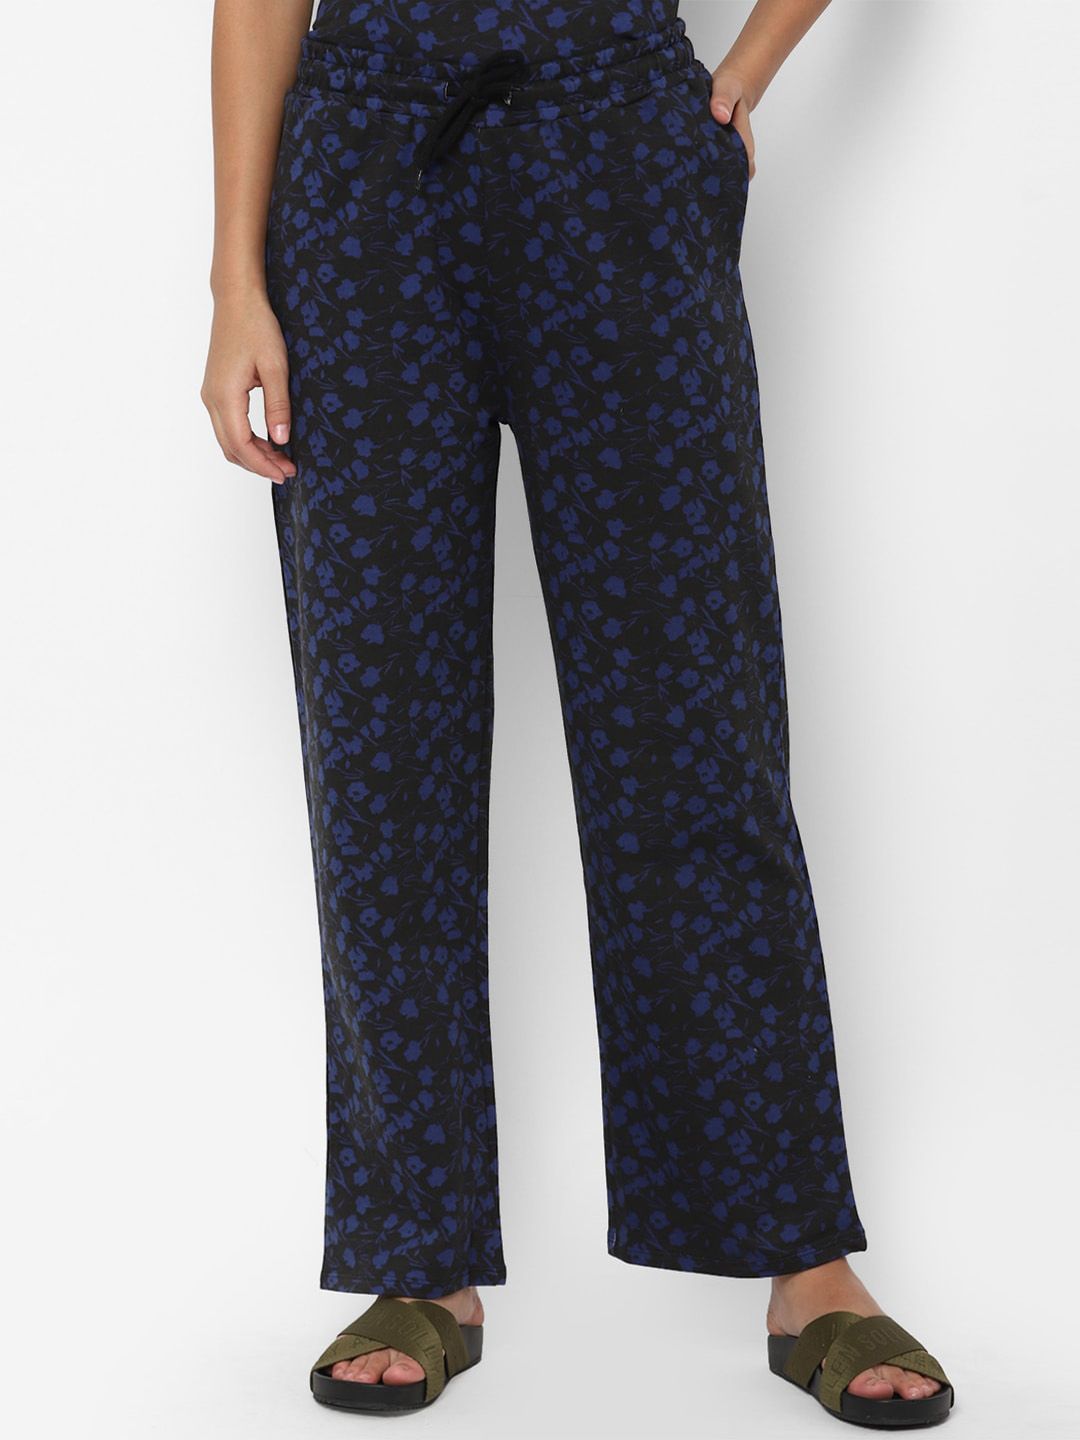 Allen Solly Woman Women Navy Blue Floral Printed Trousers Price in India